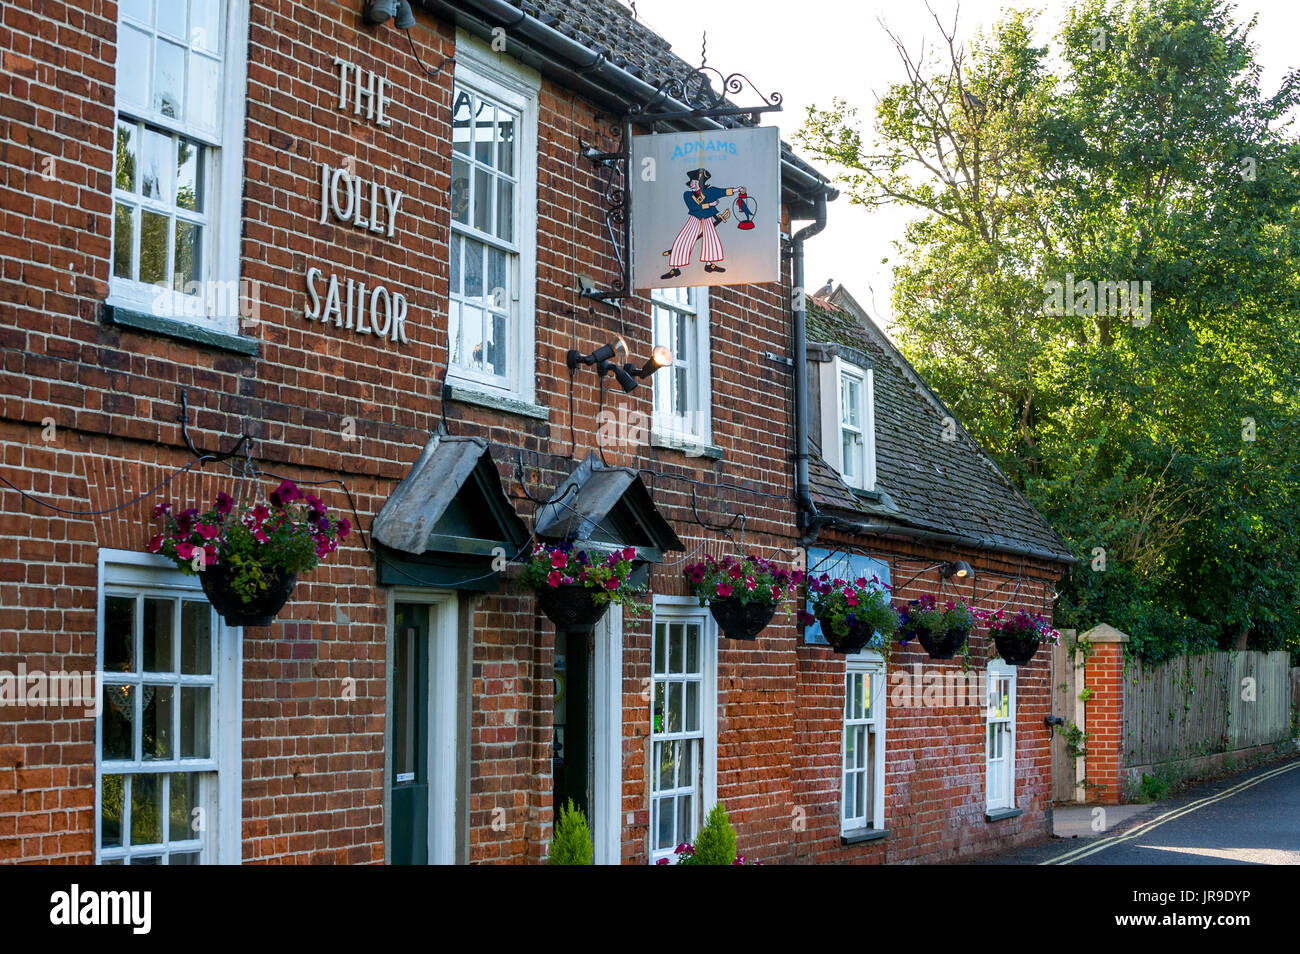 The Jolly Sailor public house the Suffolk village of Orford. Stock Photo